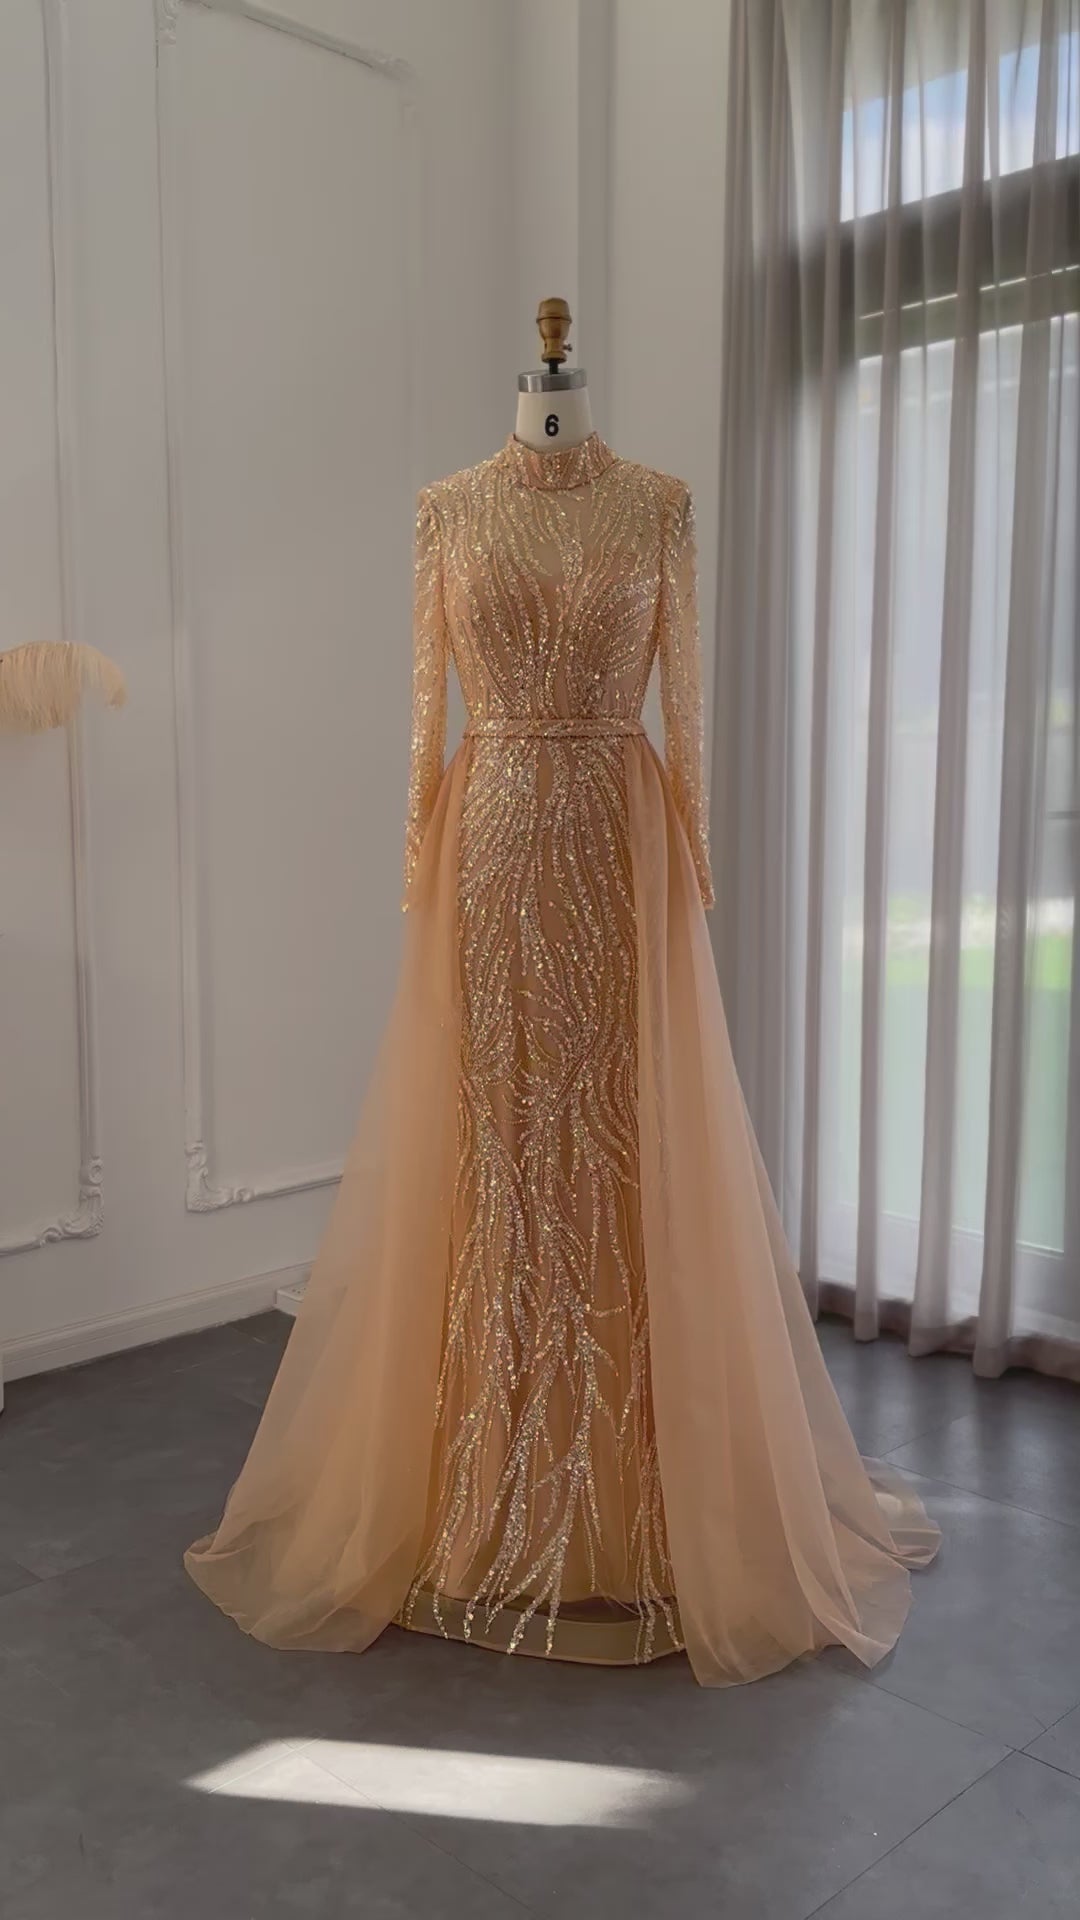 Dreamy Vow Elegant Gold Mermaid Arabic Evening Dress with Overskirt Long Sleeves Luxury Muslim Wedding Formal Party Gown SS271